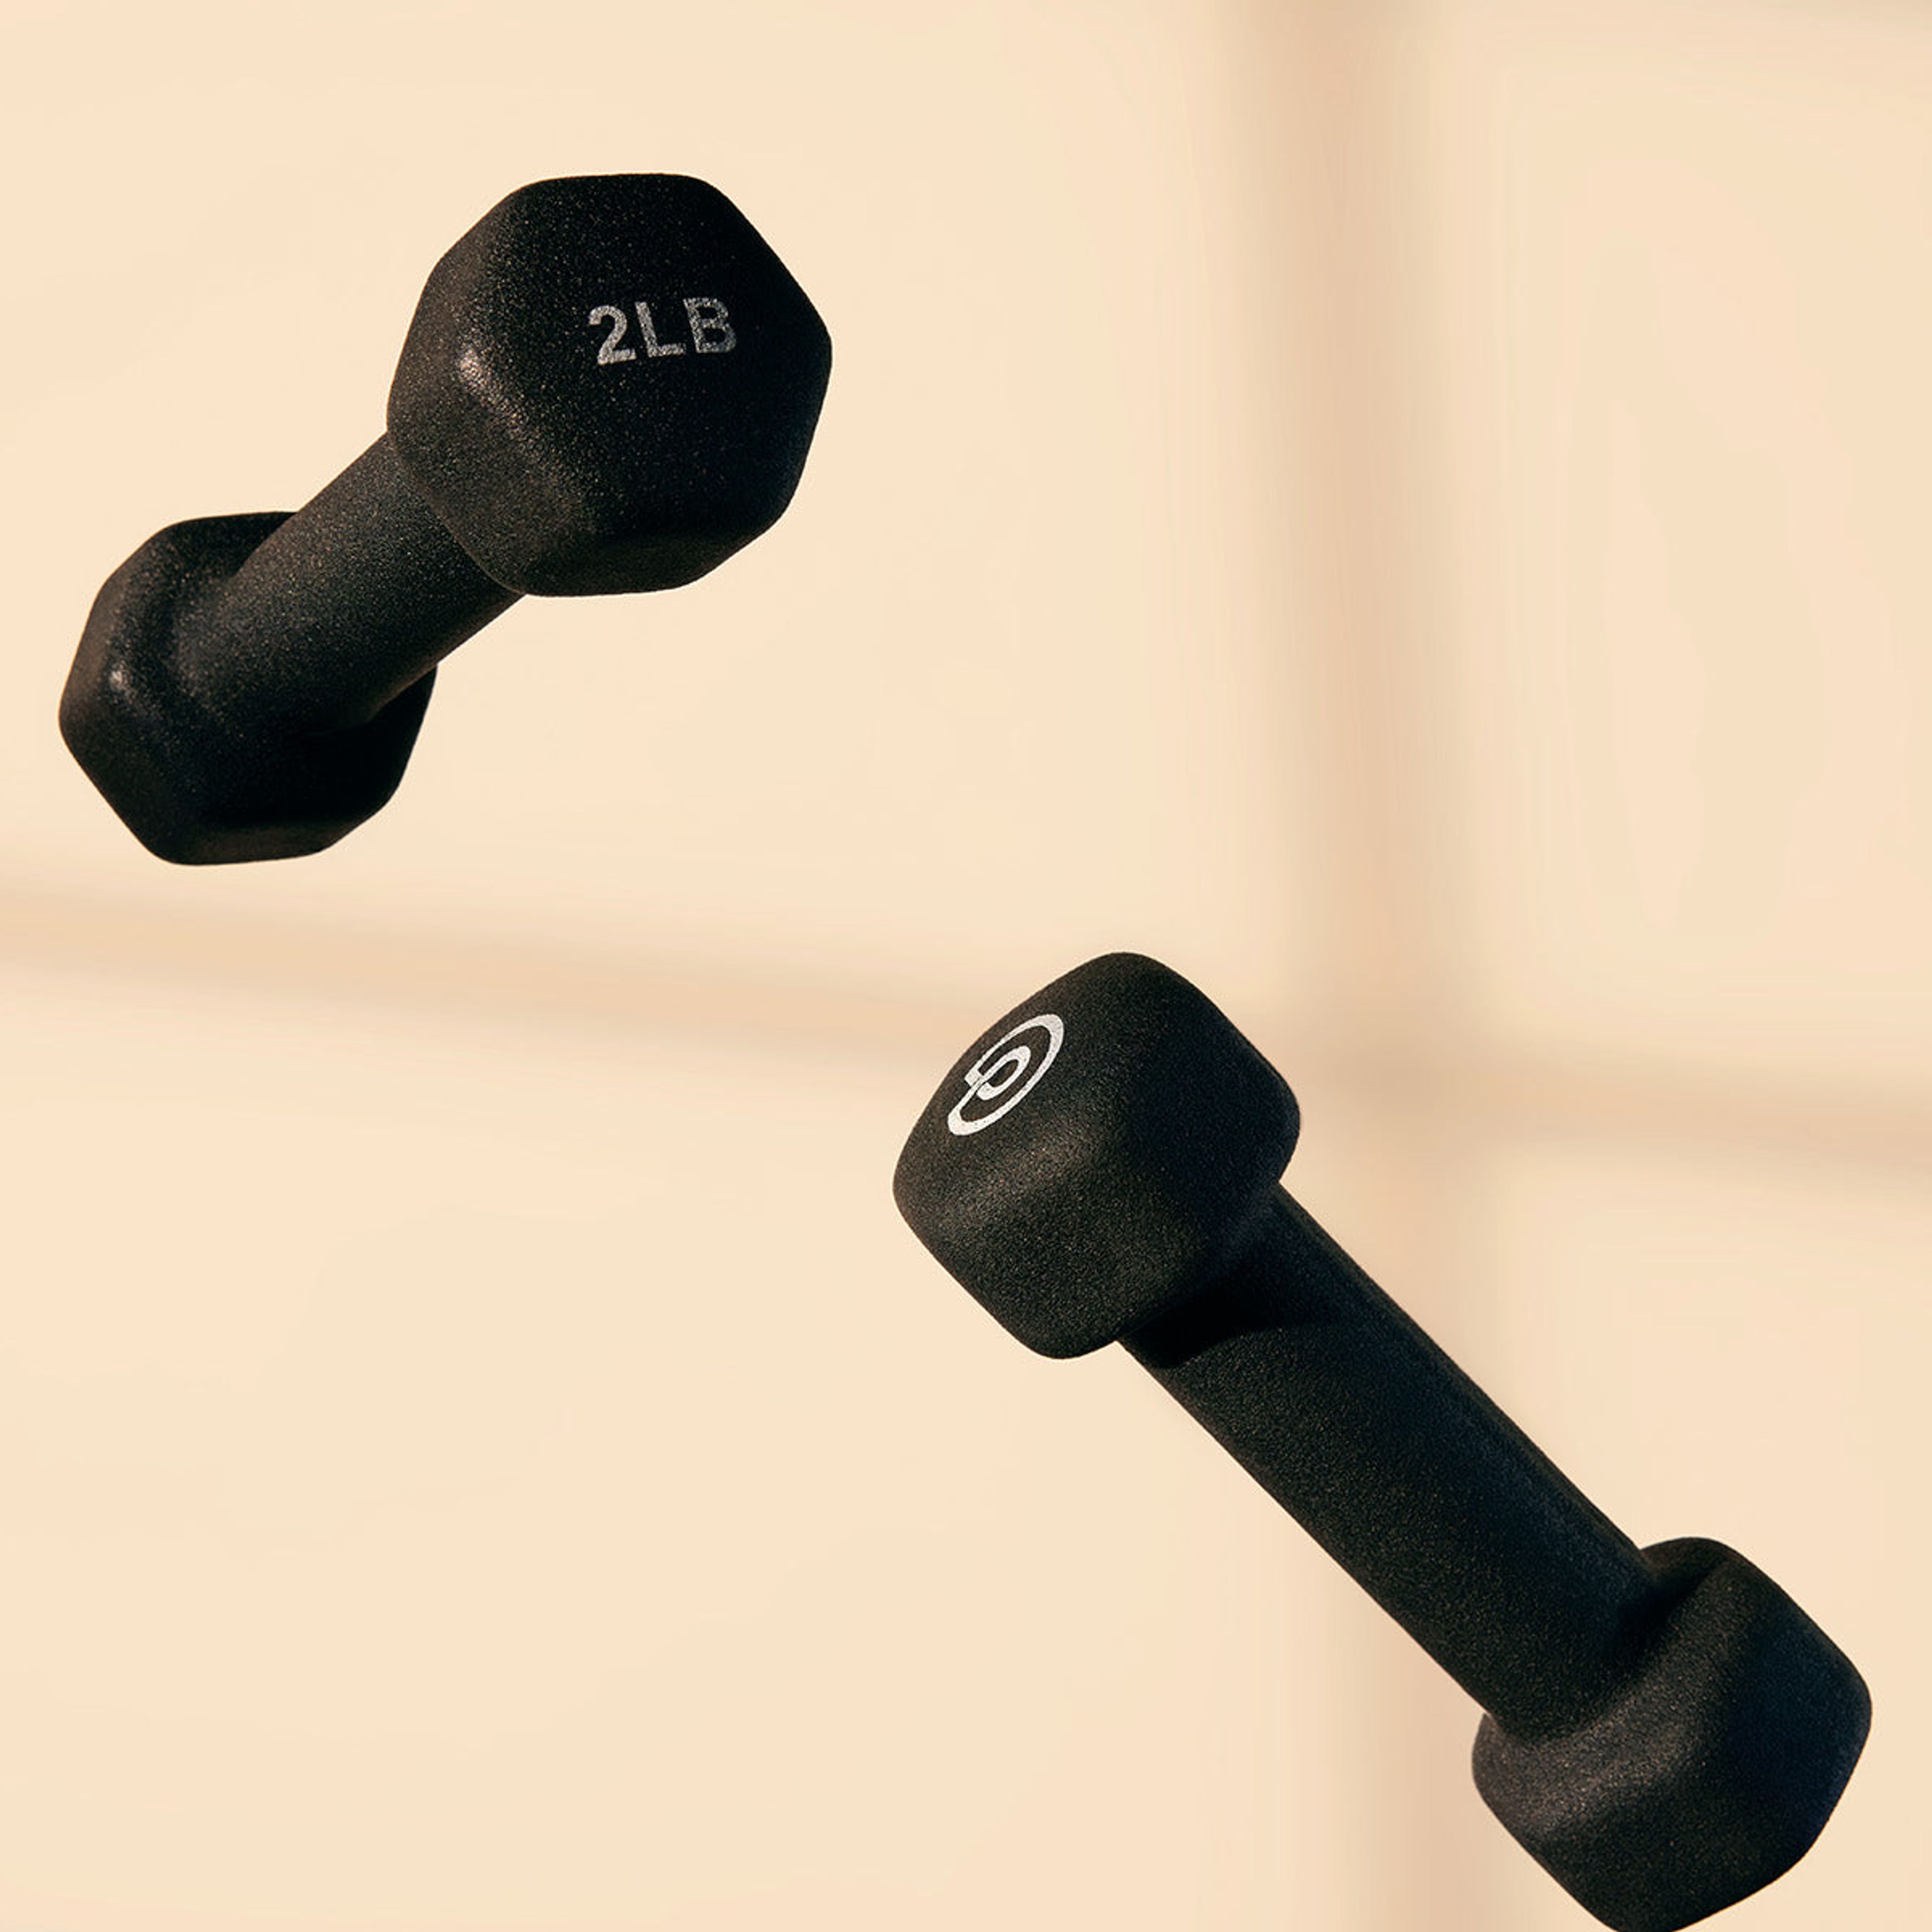 2 lb Hand Weights